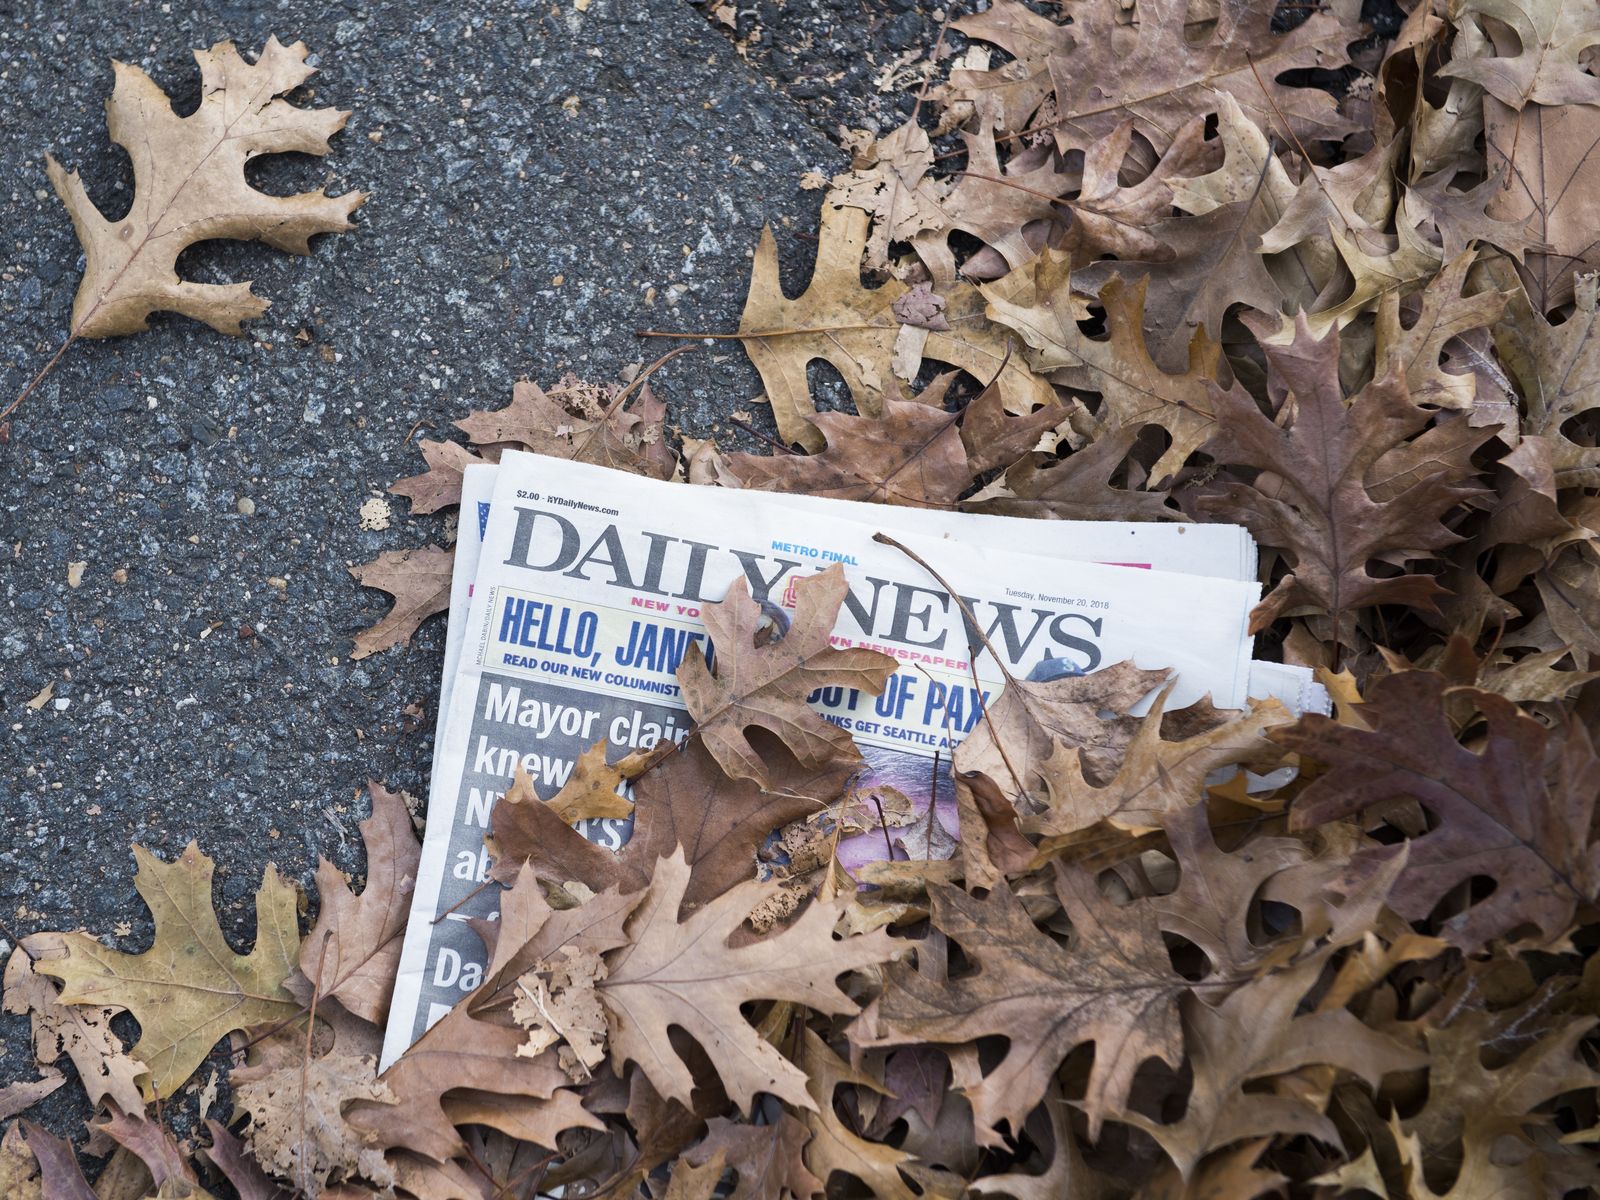 The Fine Print - Reporting on the Media Industry in New York City